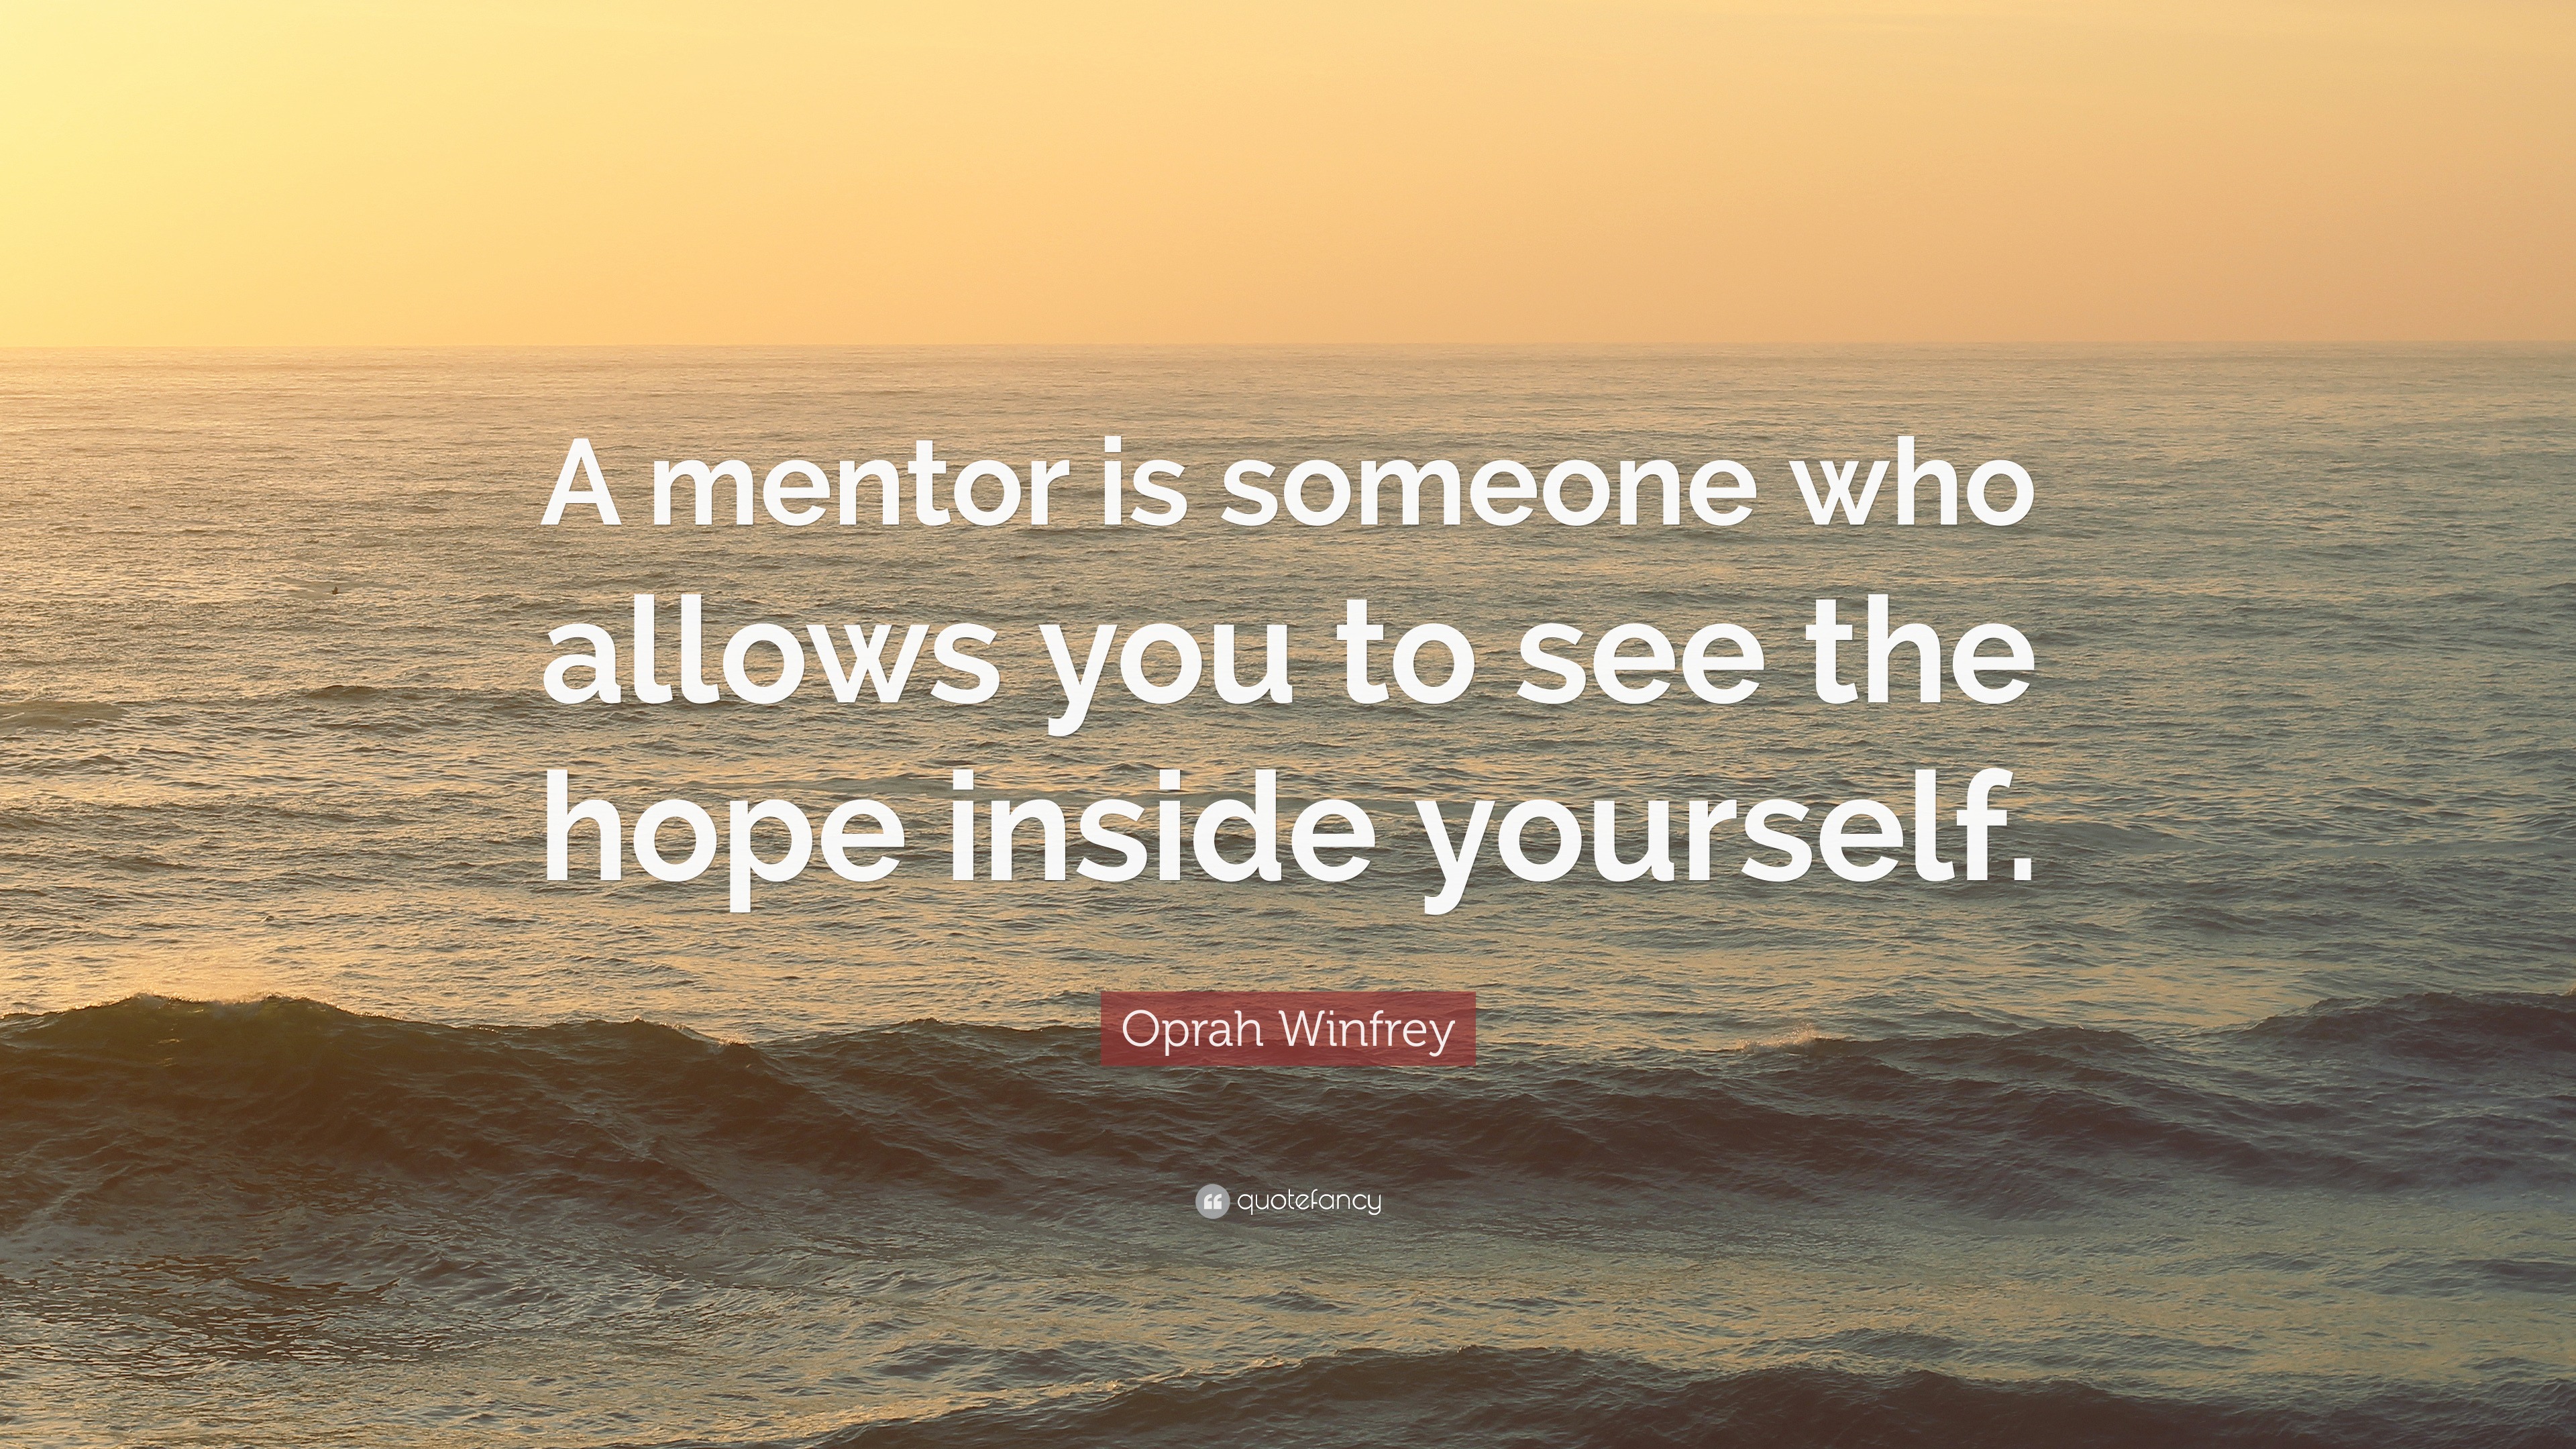 Oprah Winfrey Quote “A mentor is someone who allows you